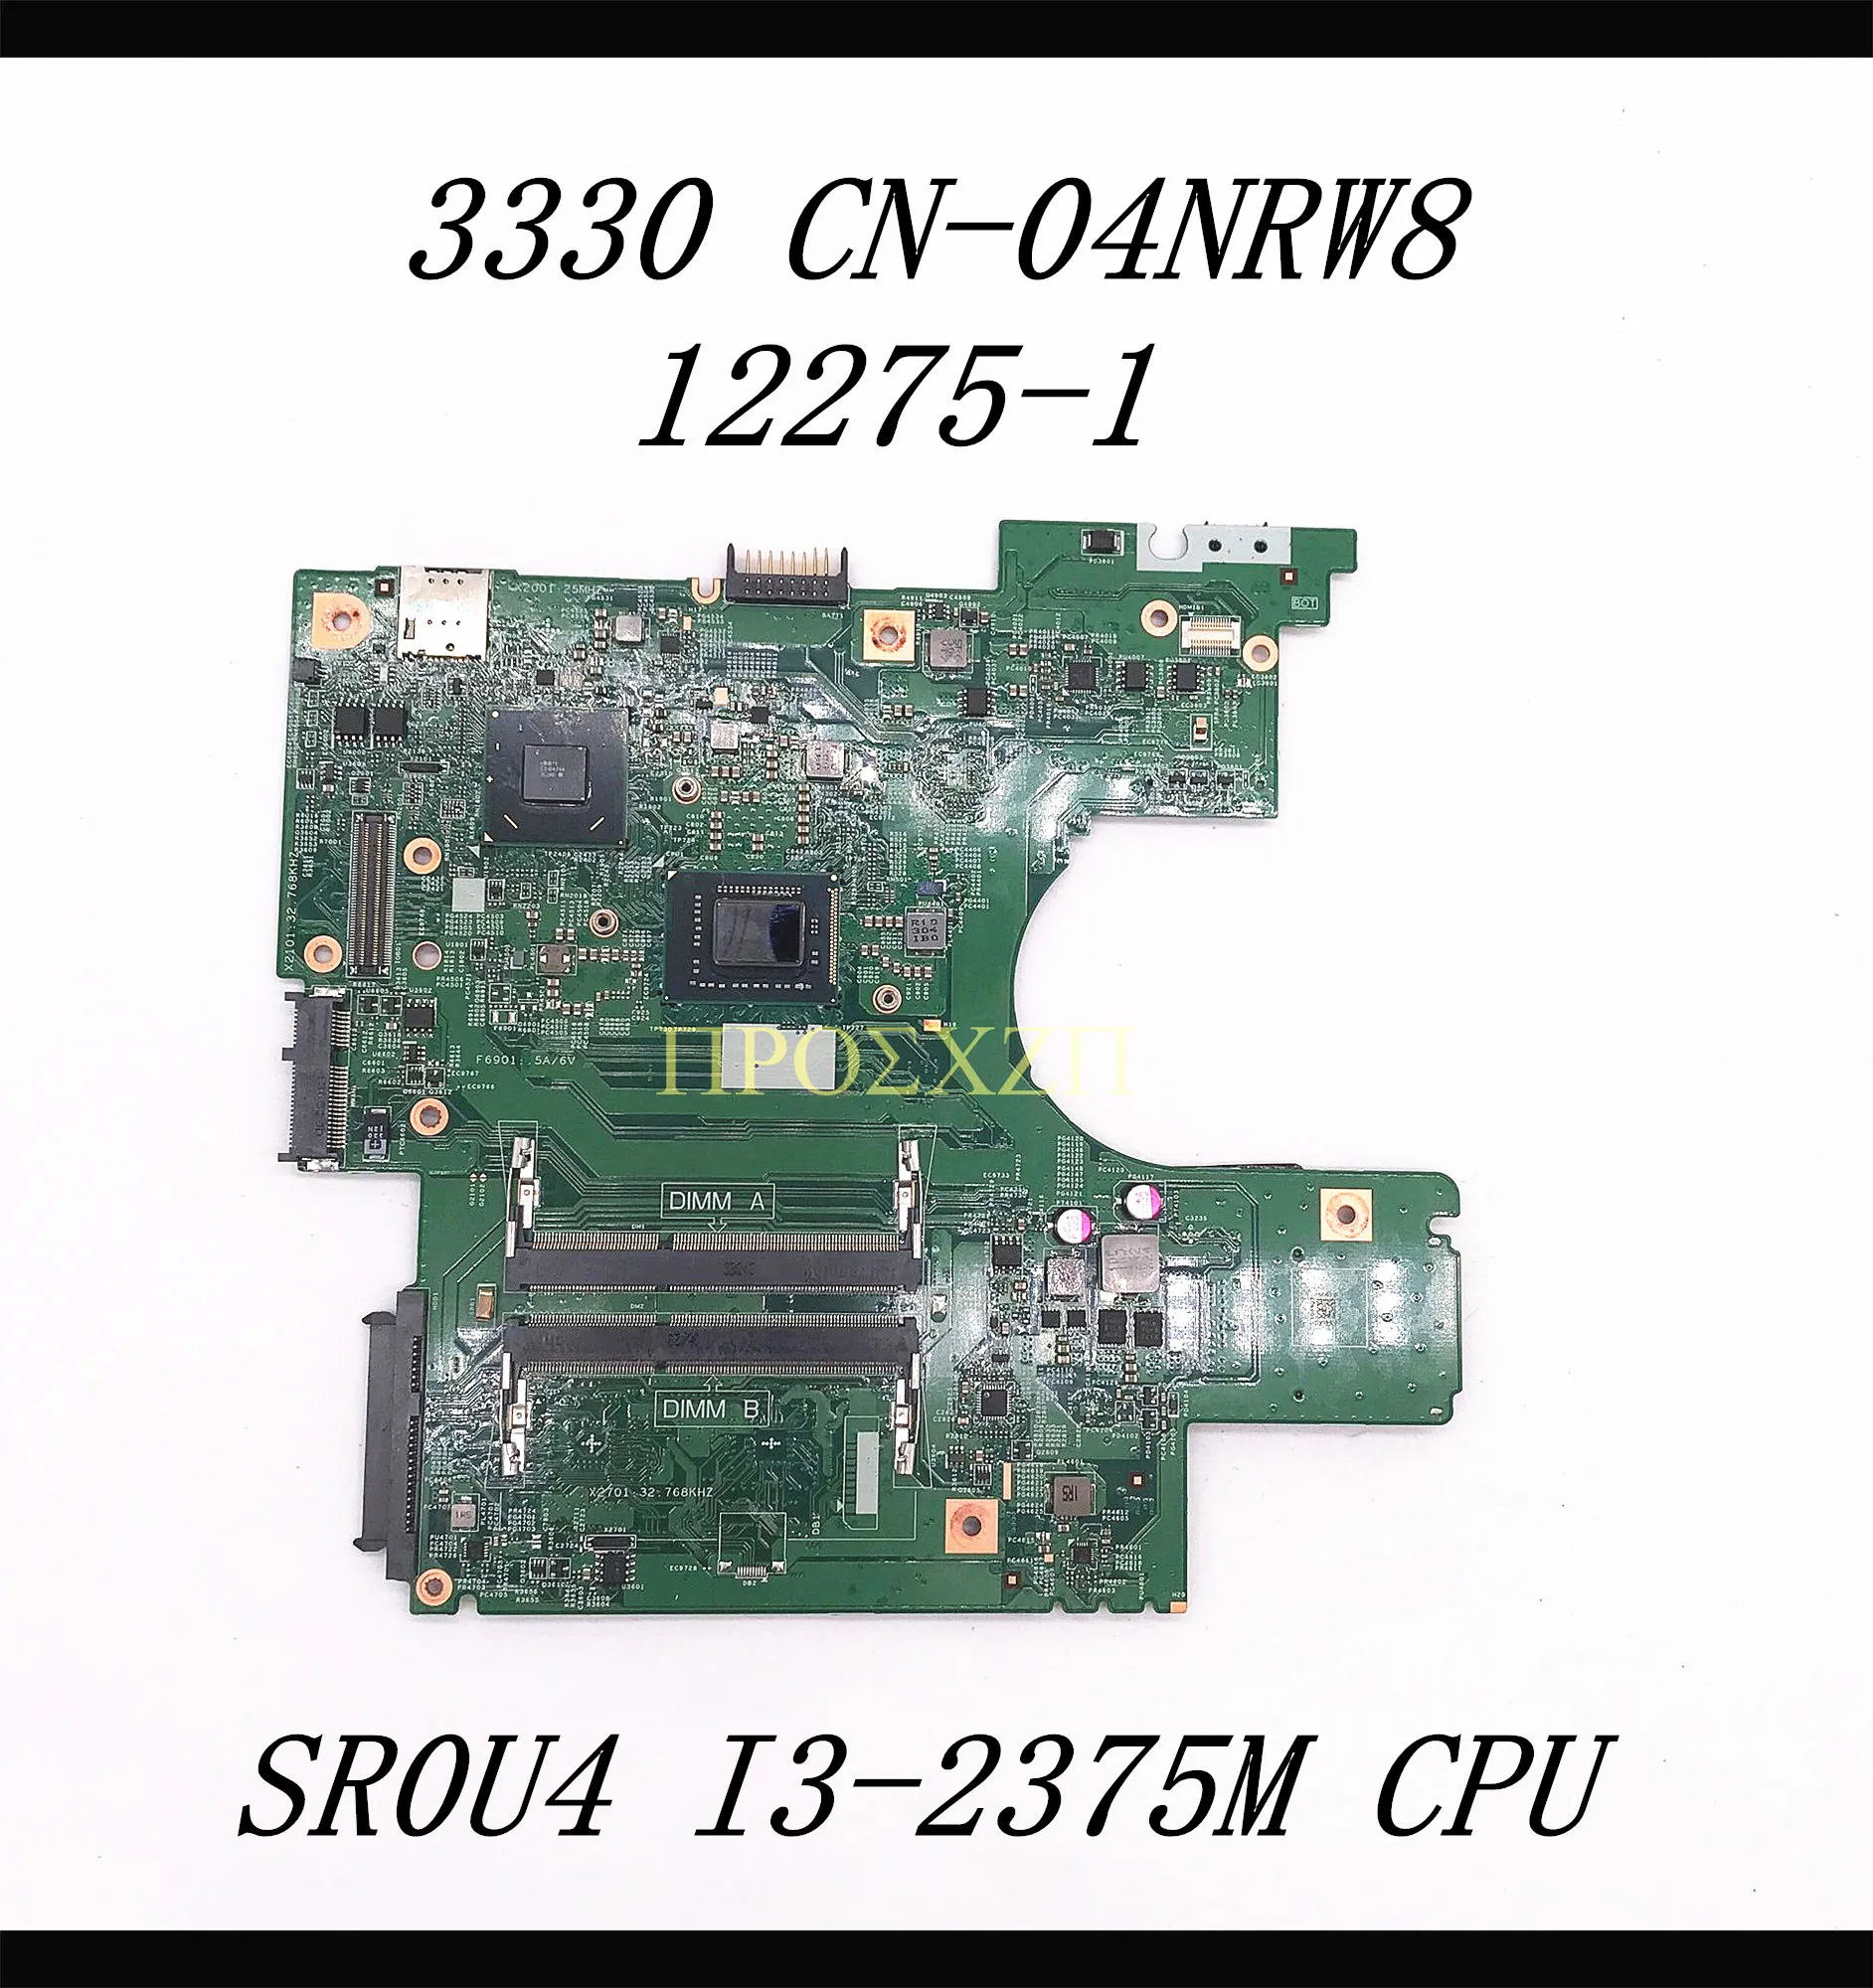 CN-04NRW8 04NRW8 4NRW8 High Quality For DELL 3330 Laptop Motherboard 12275-1 With SR0U4 I3-2375M CPU SLJ8C HM77 100% Full Tested